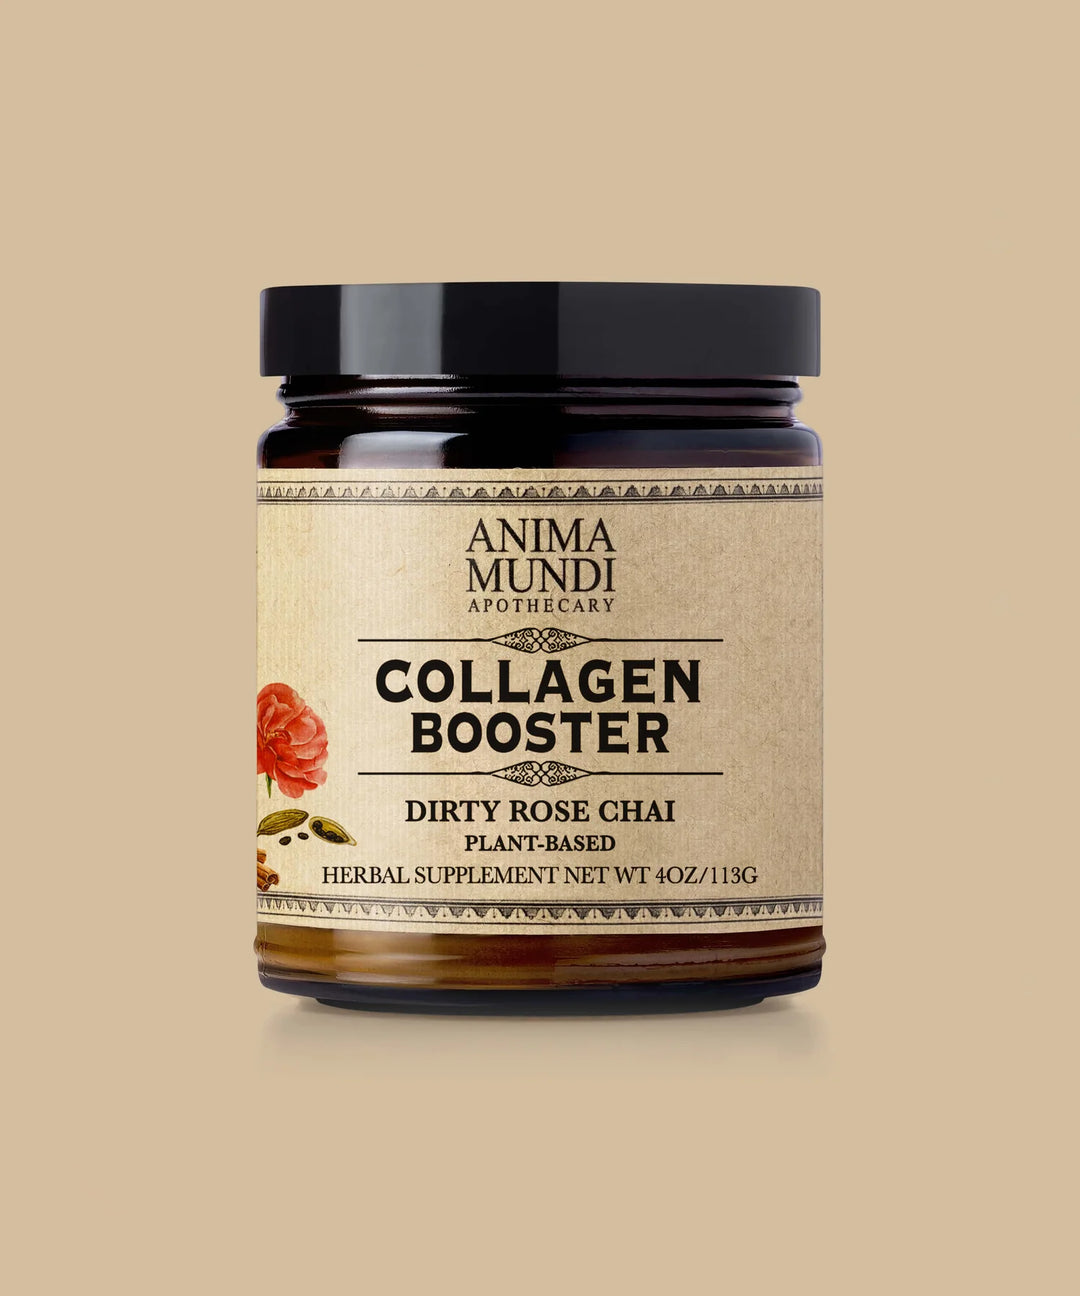 Collagen Booster Dirty Rose Chai: plantbased North Glow